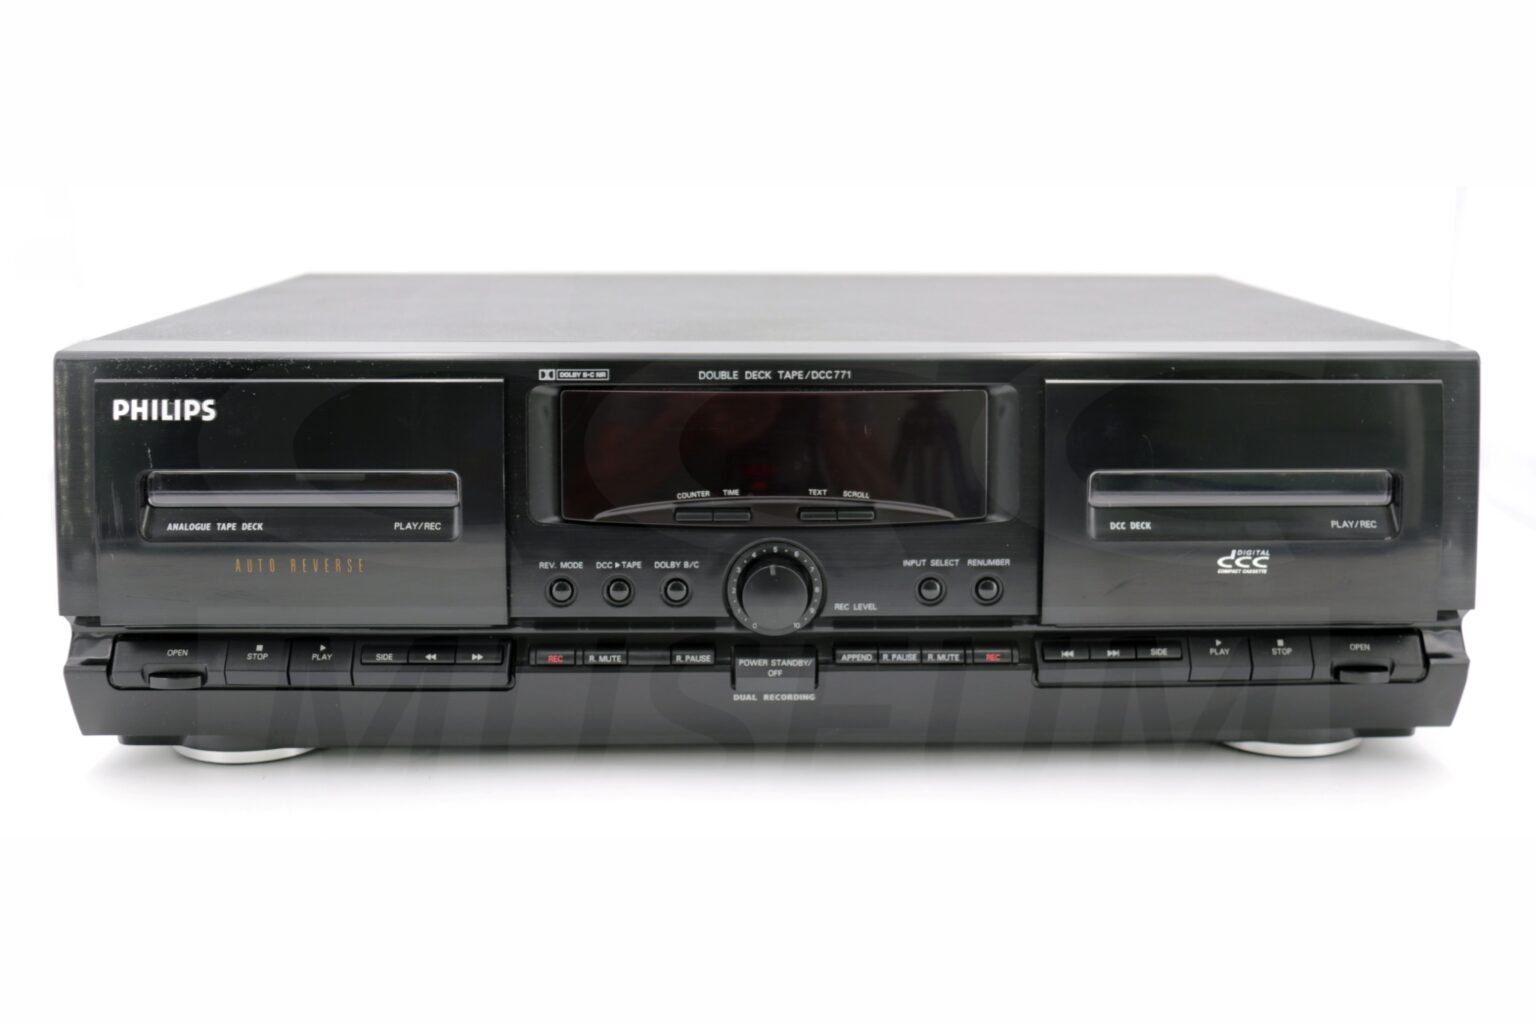 Philips DCC771 - Front